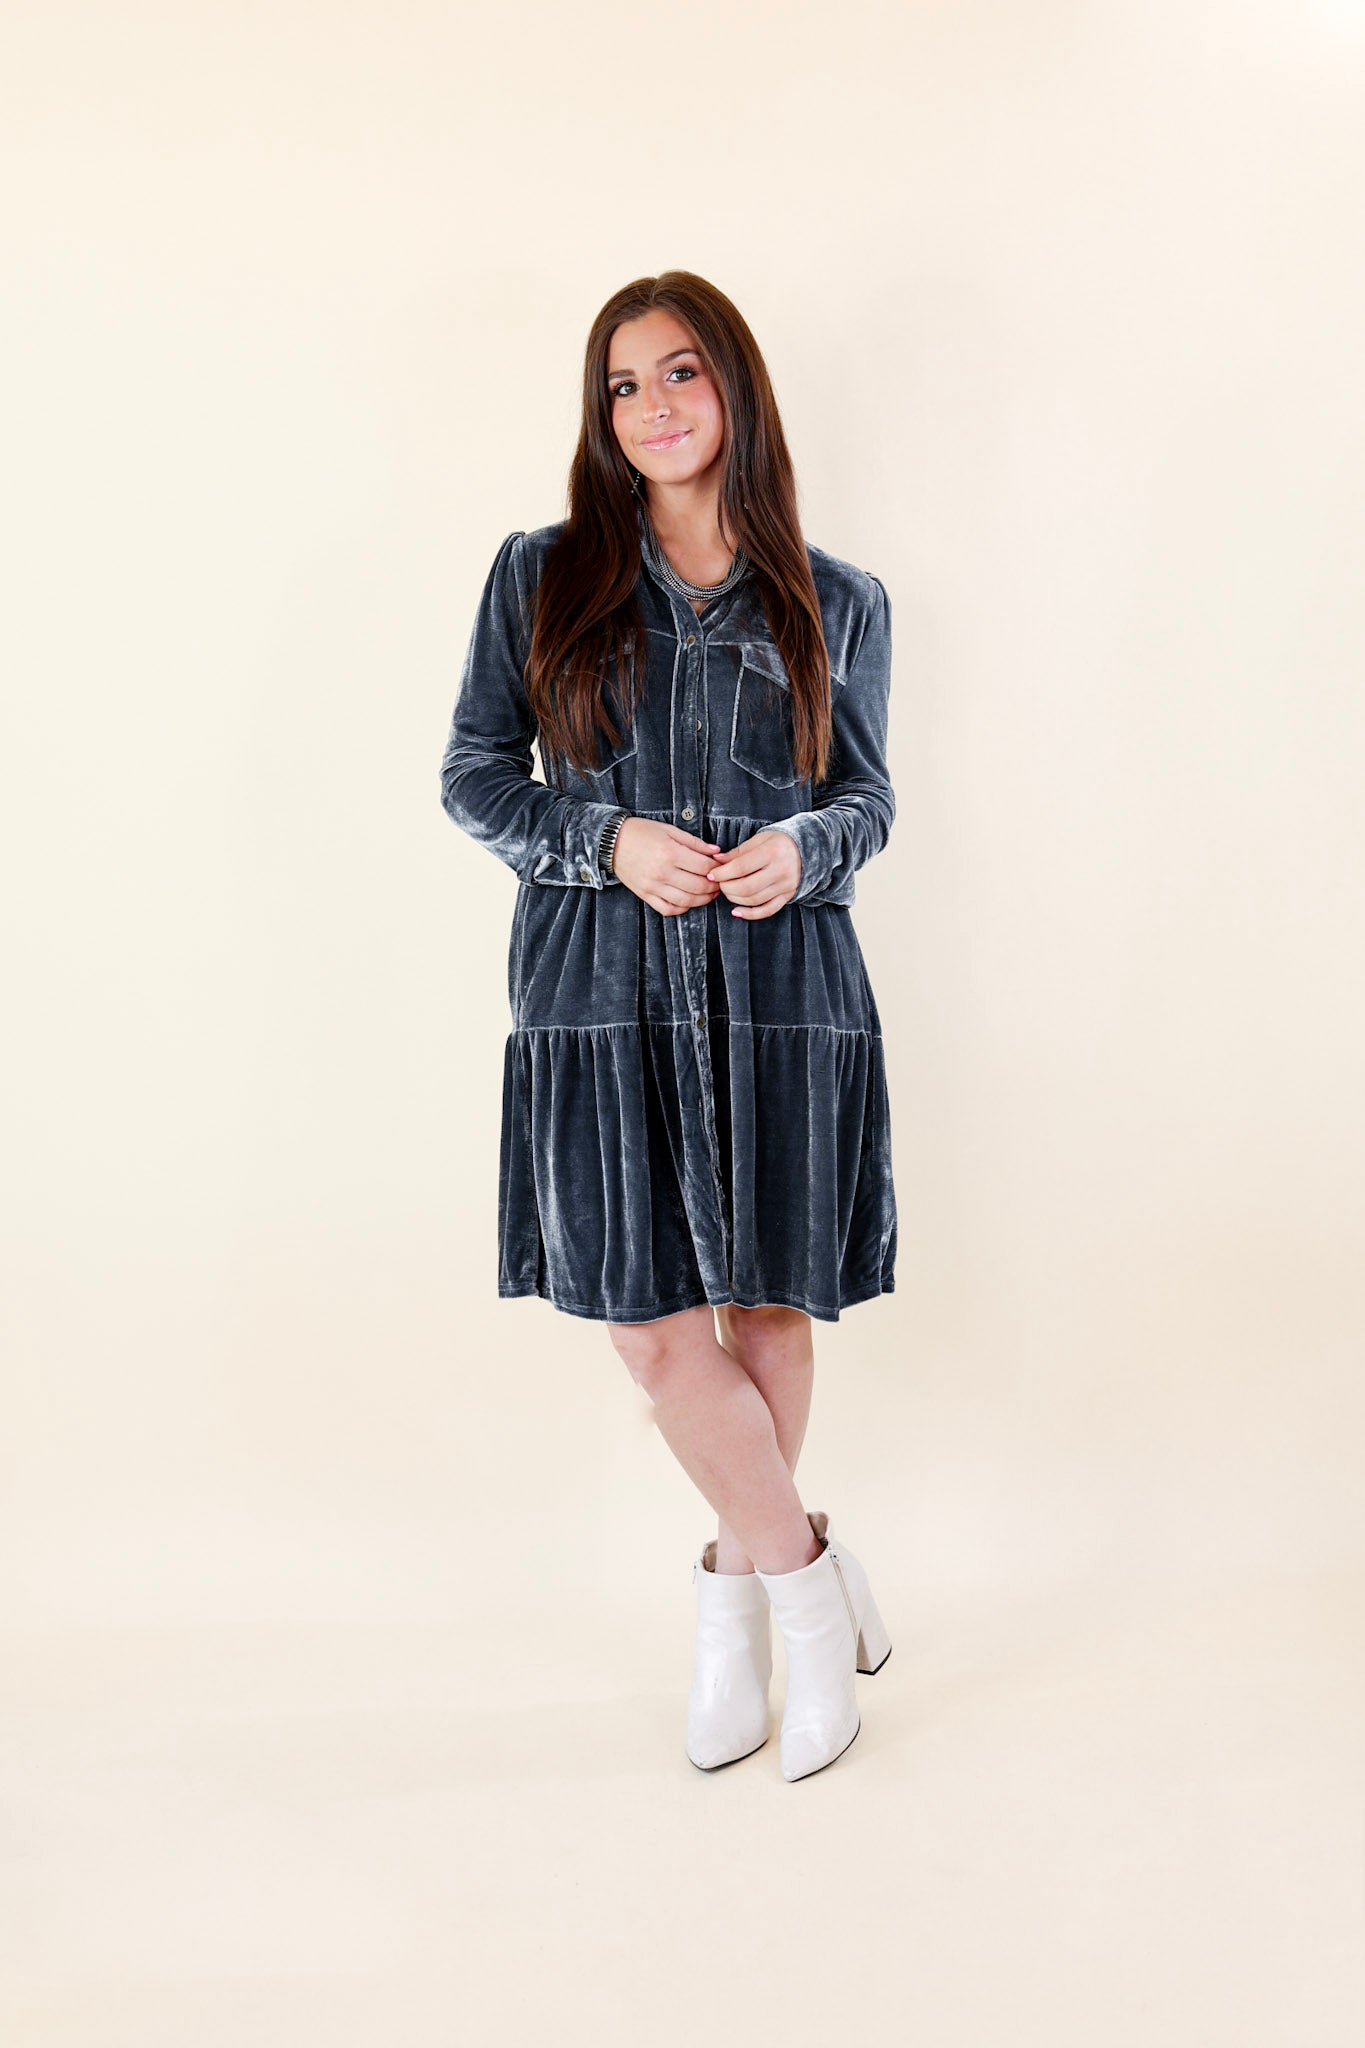 Grateful Gathering Velvet Button Up Dress with Long Sleeves in Steel Blue - Giddy Up Glamour Boutique